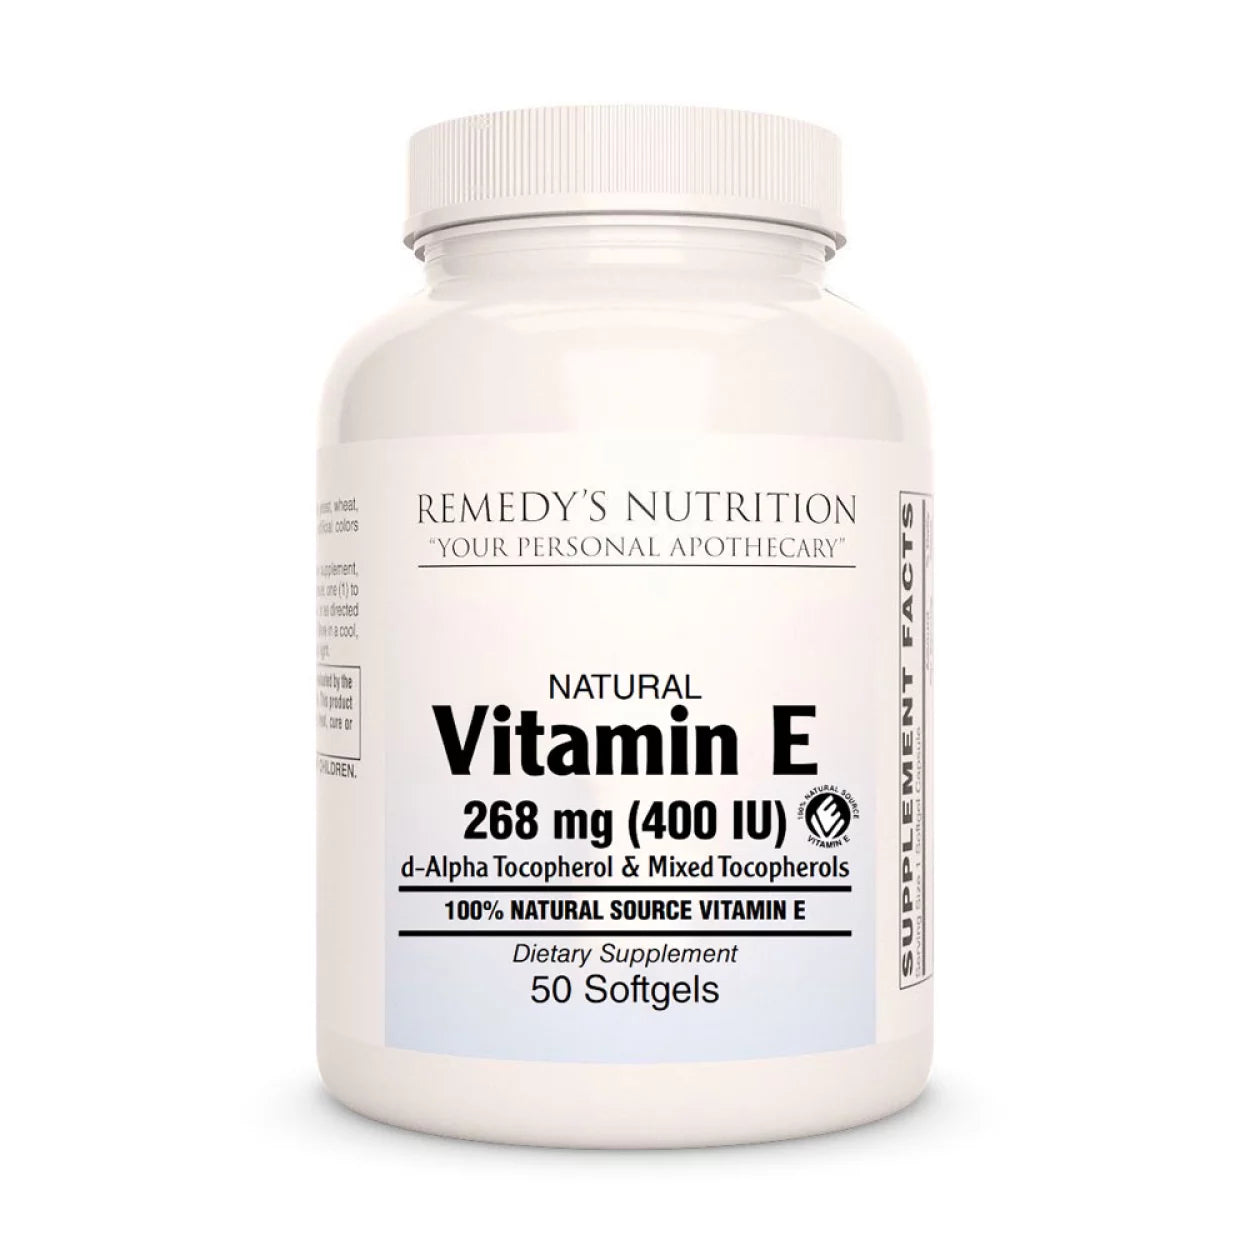 Image of Remedy's Nutrition® Vitamin E Softgels Dietary Supplement front bottle. 400 IU